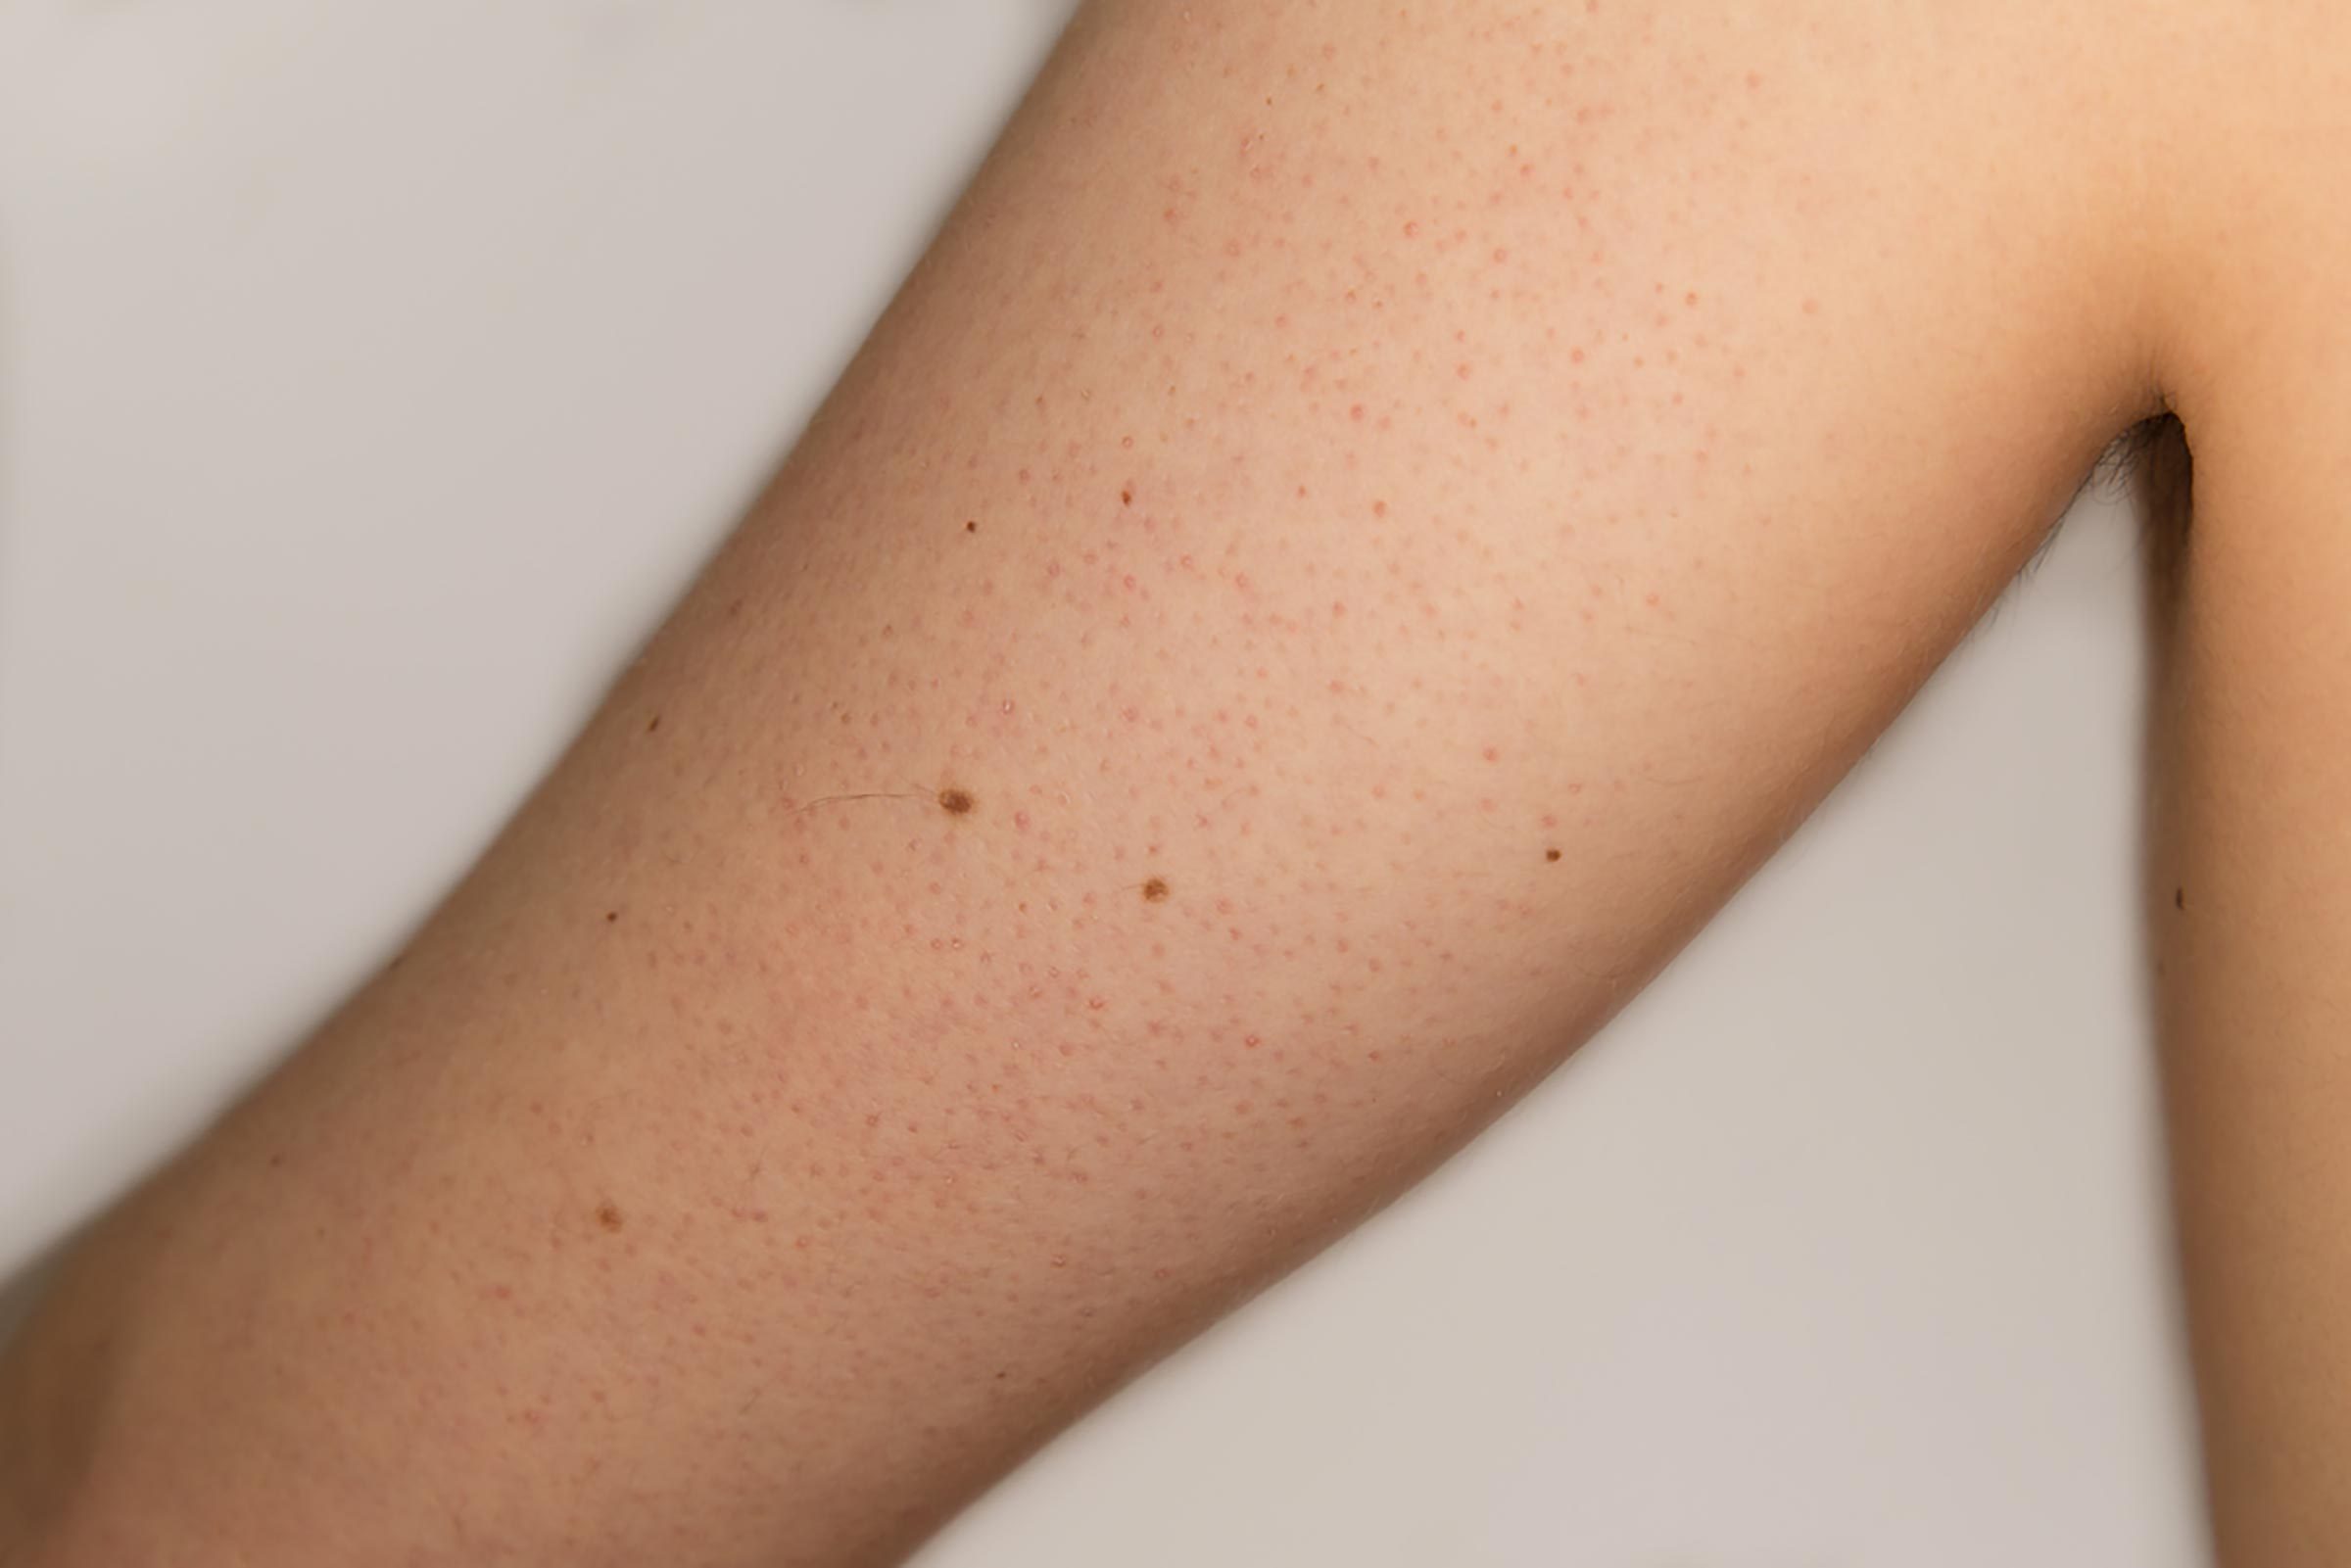 keratosis on the upper arm